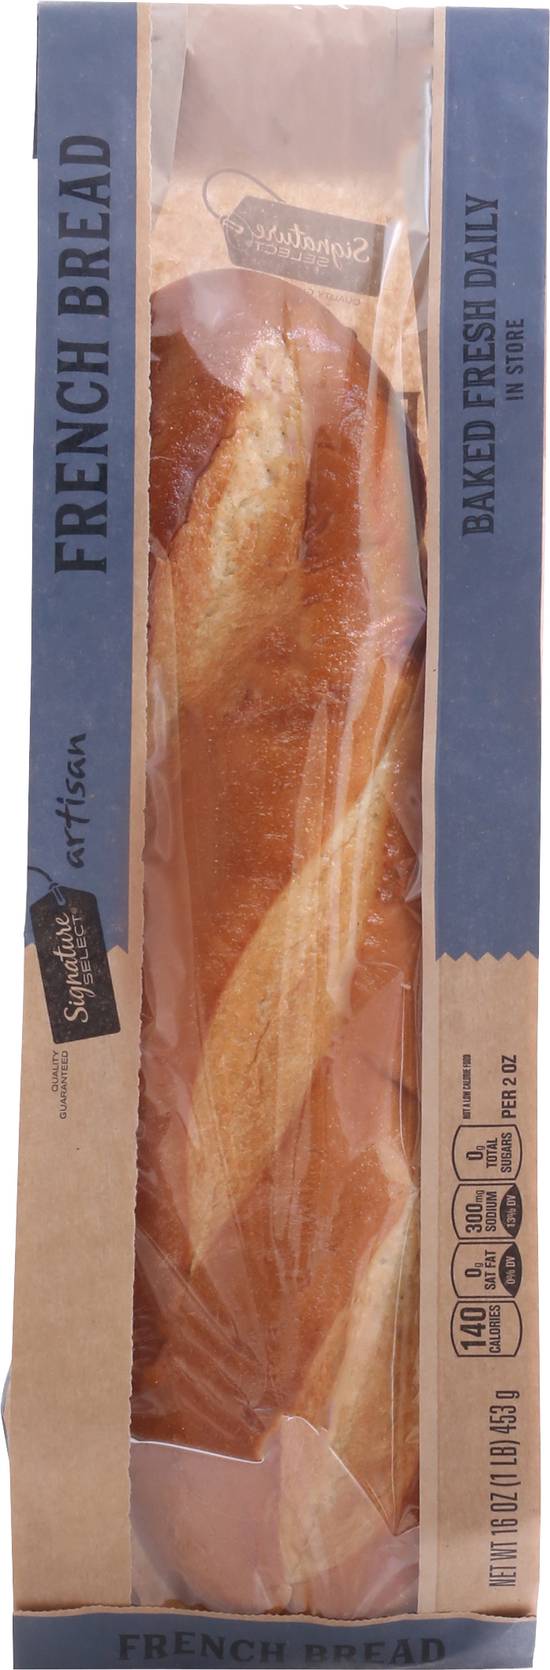 Signature Select Fresh Baked Artisan French Bread (16 oz)